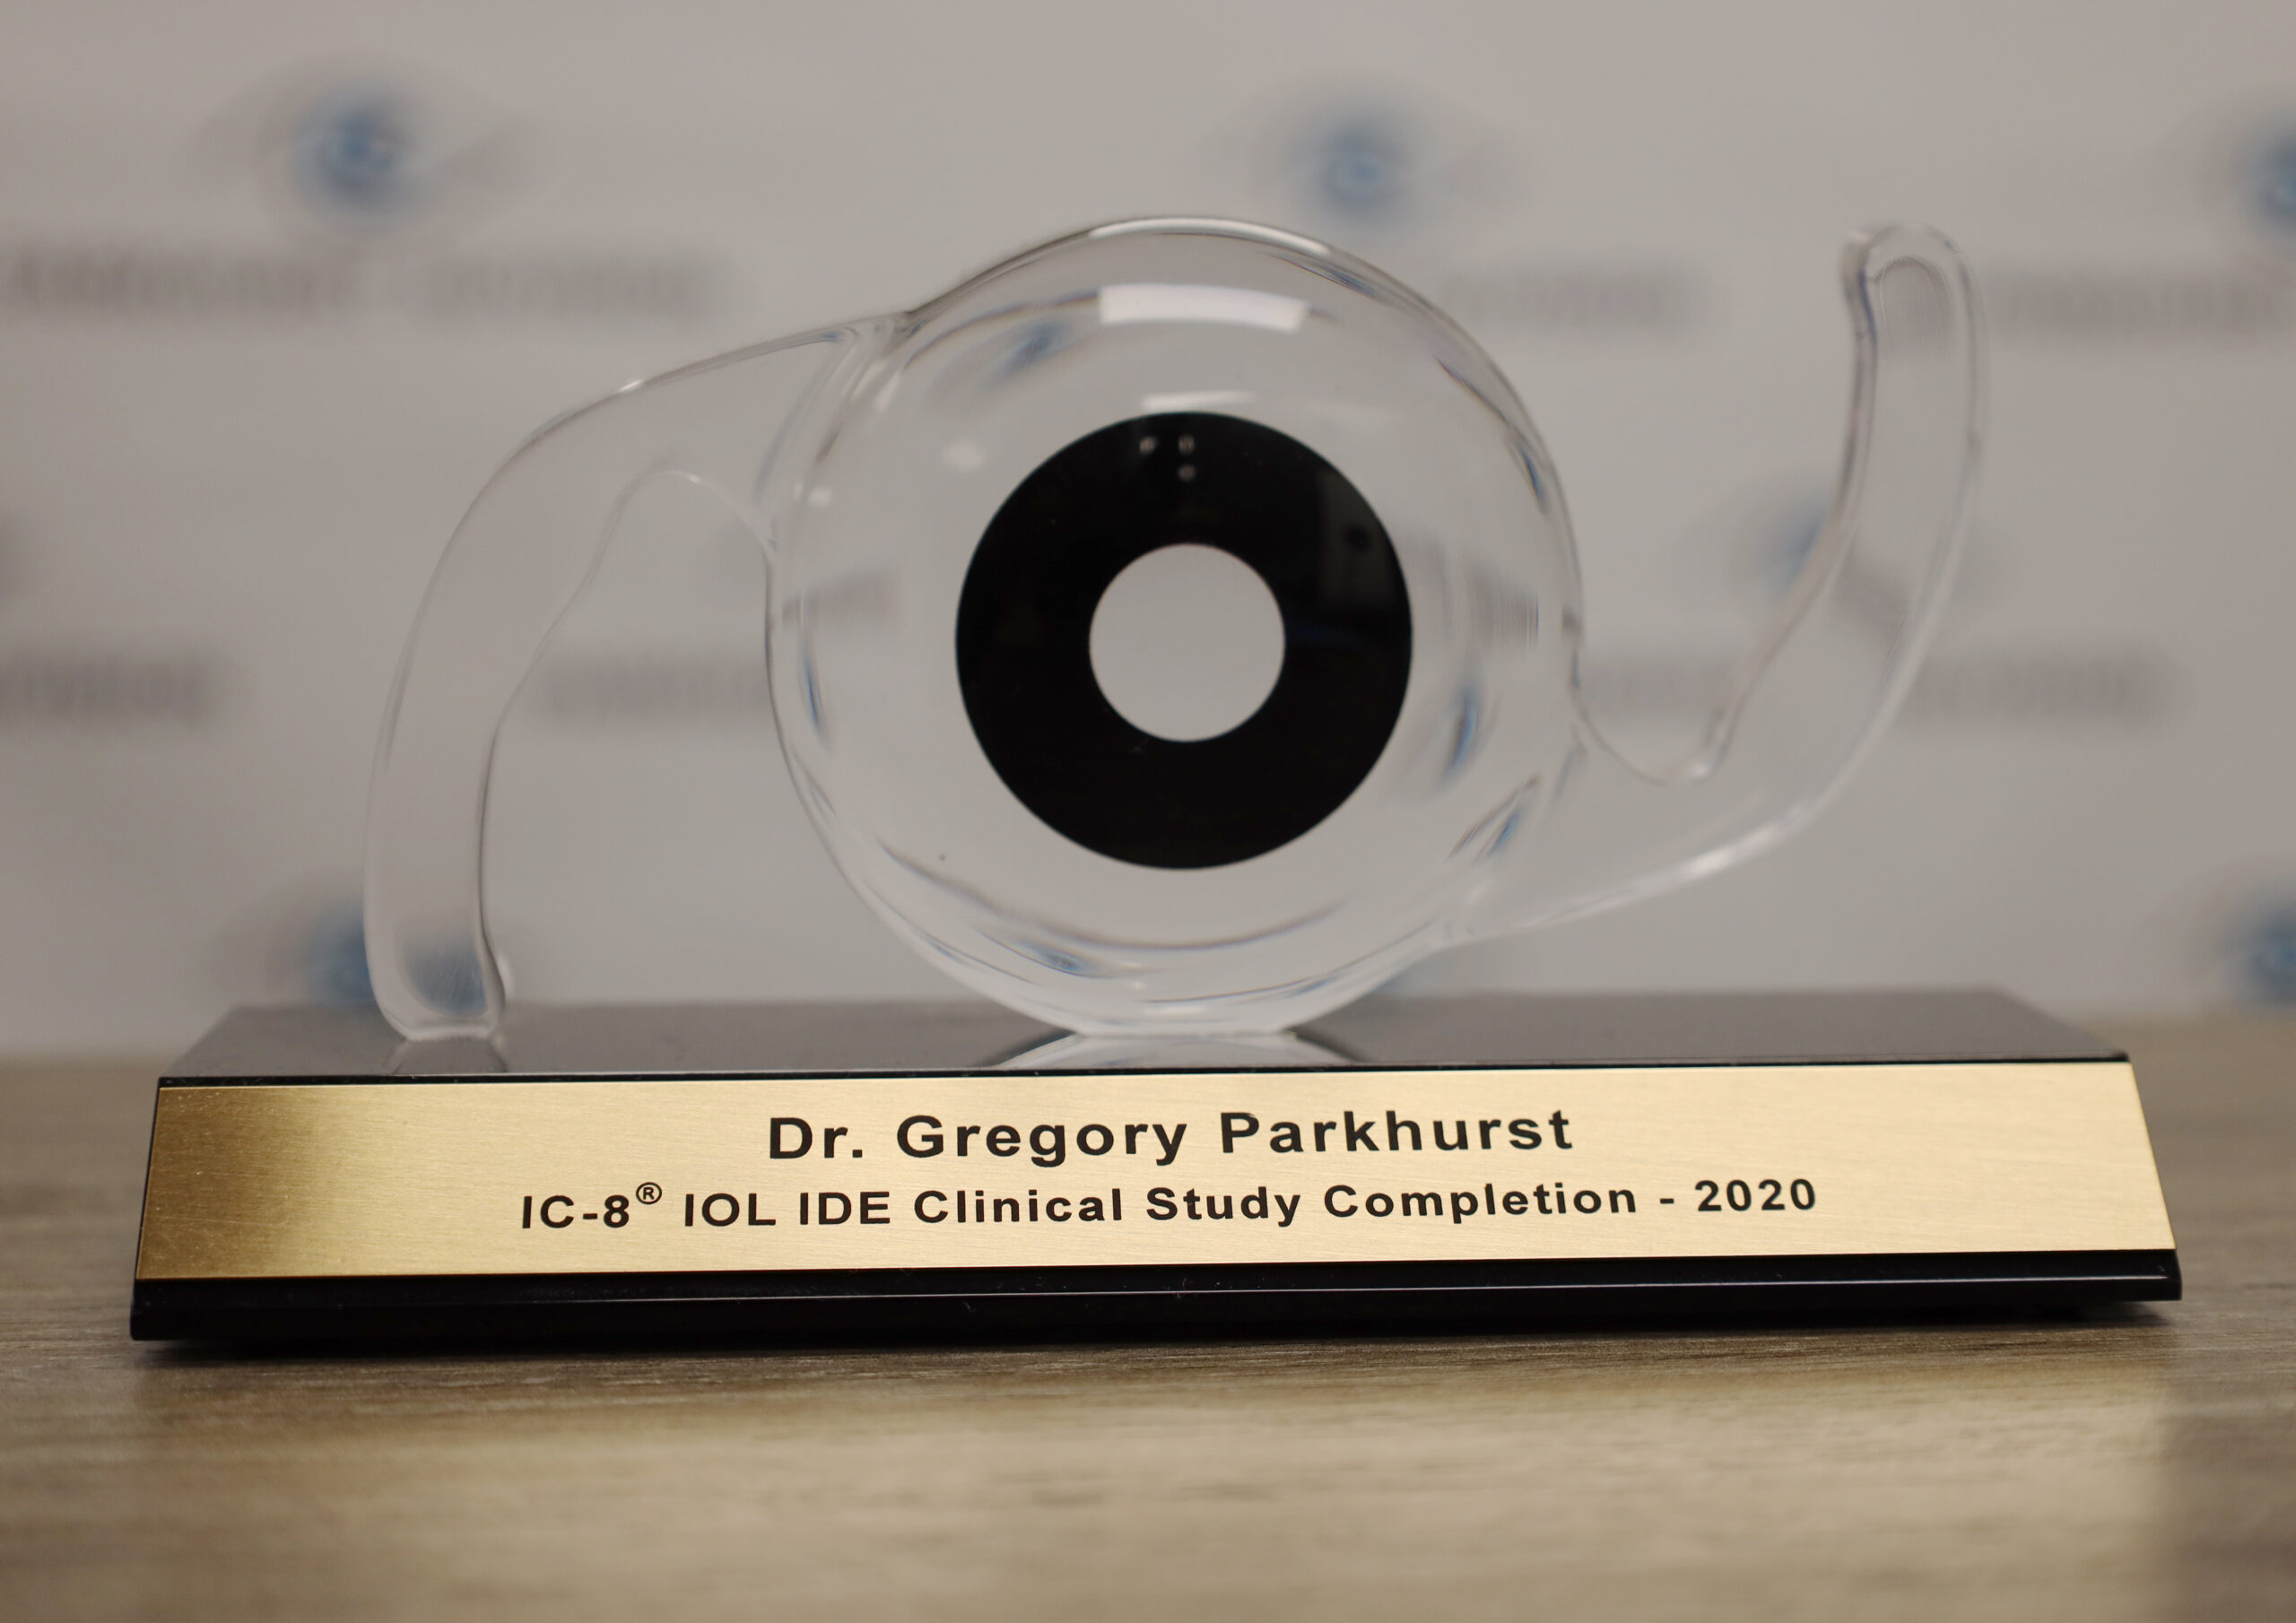 iol ic hdl ide clinical study completion awarded to doctor gregory parkhurst